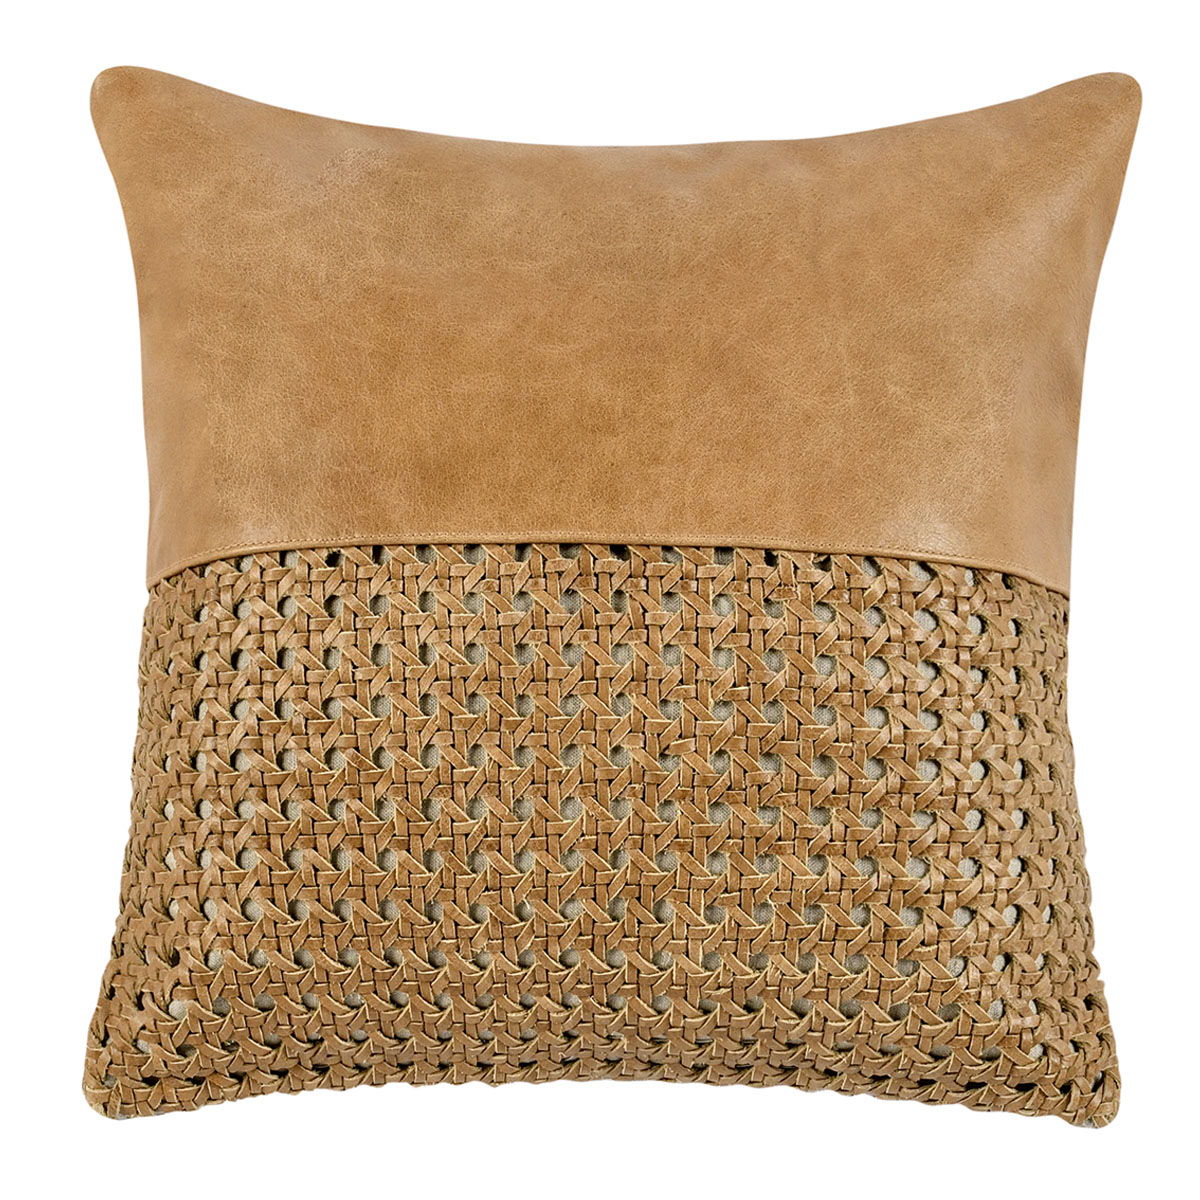 Timeless - TL Toscano Leather Pillow